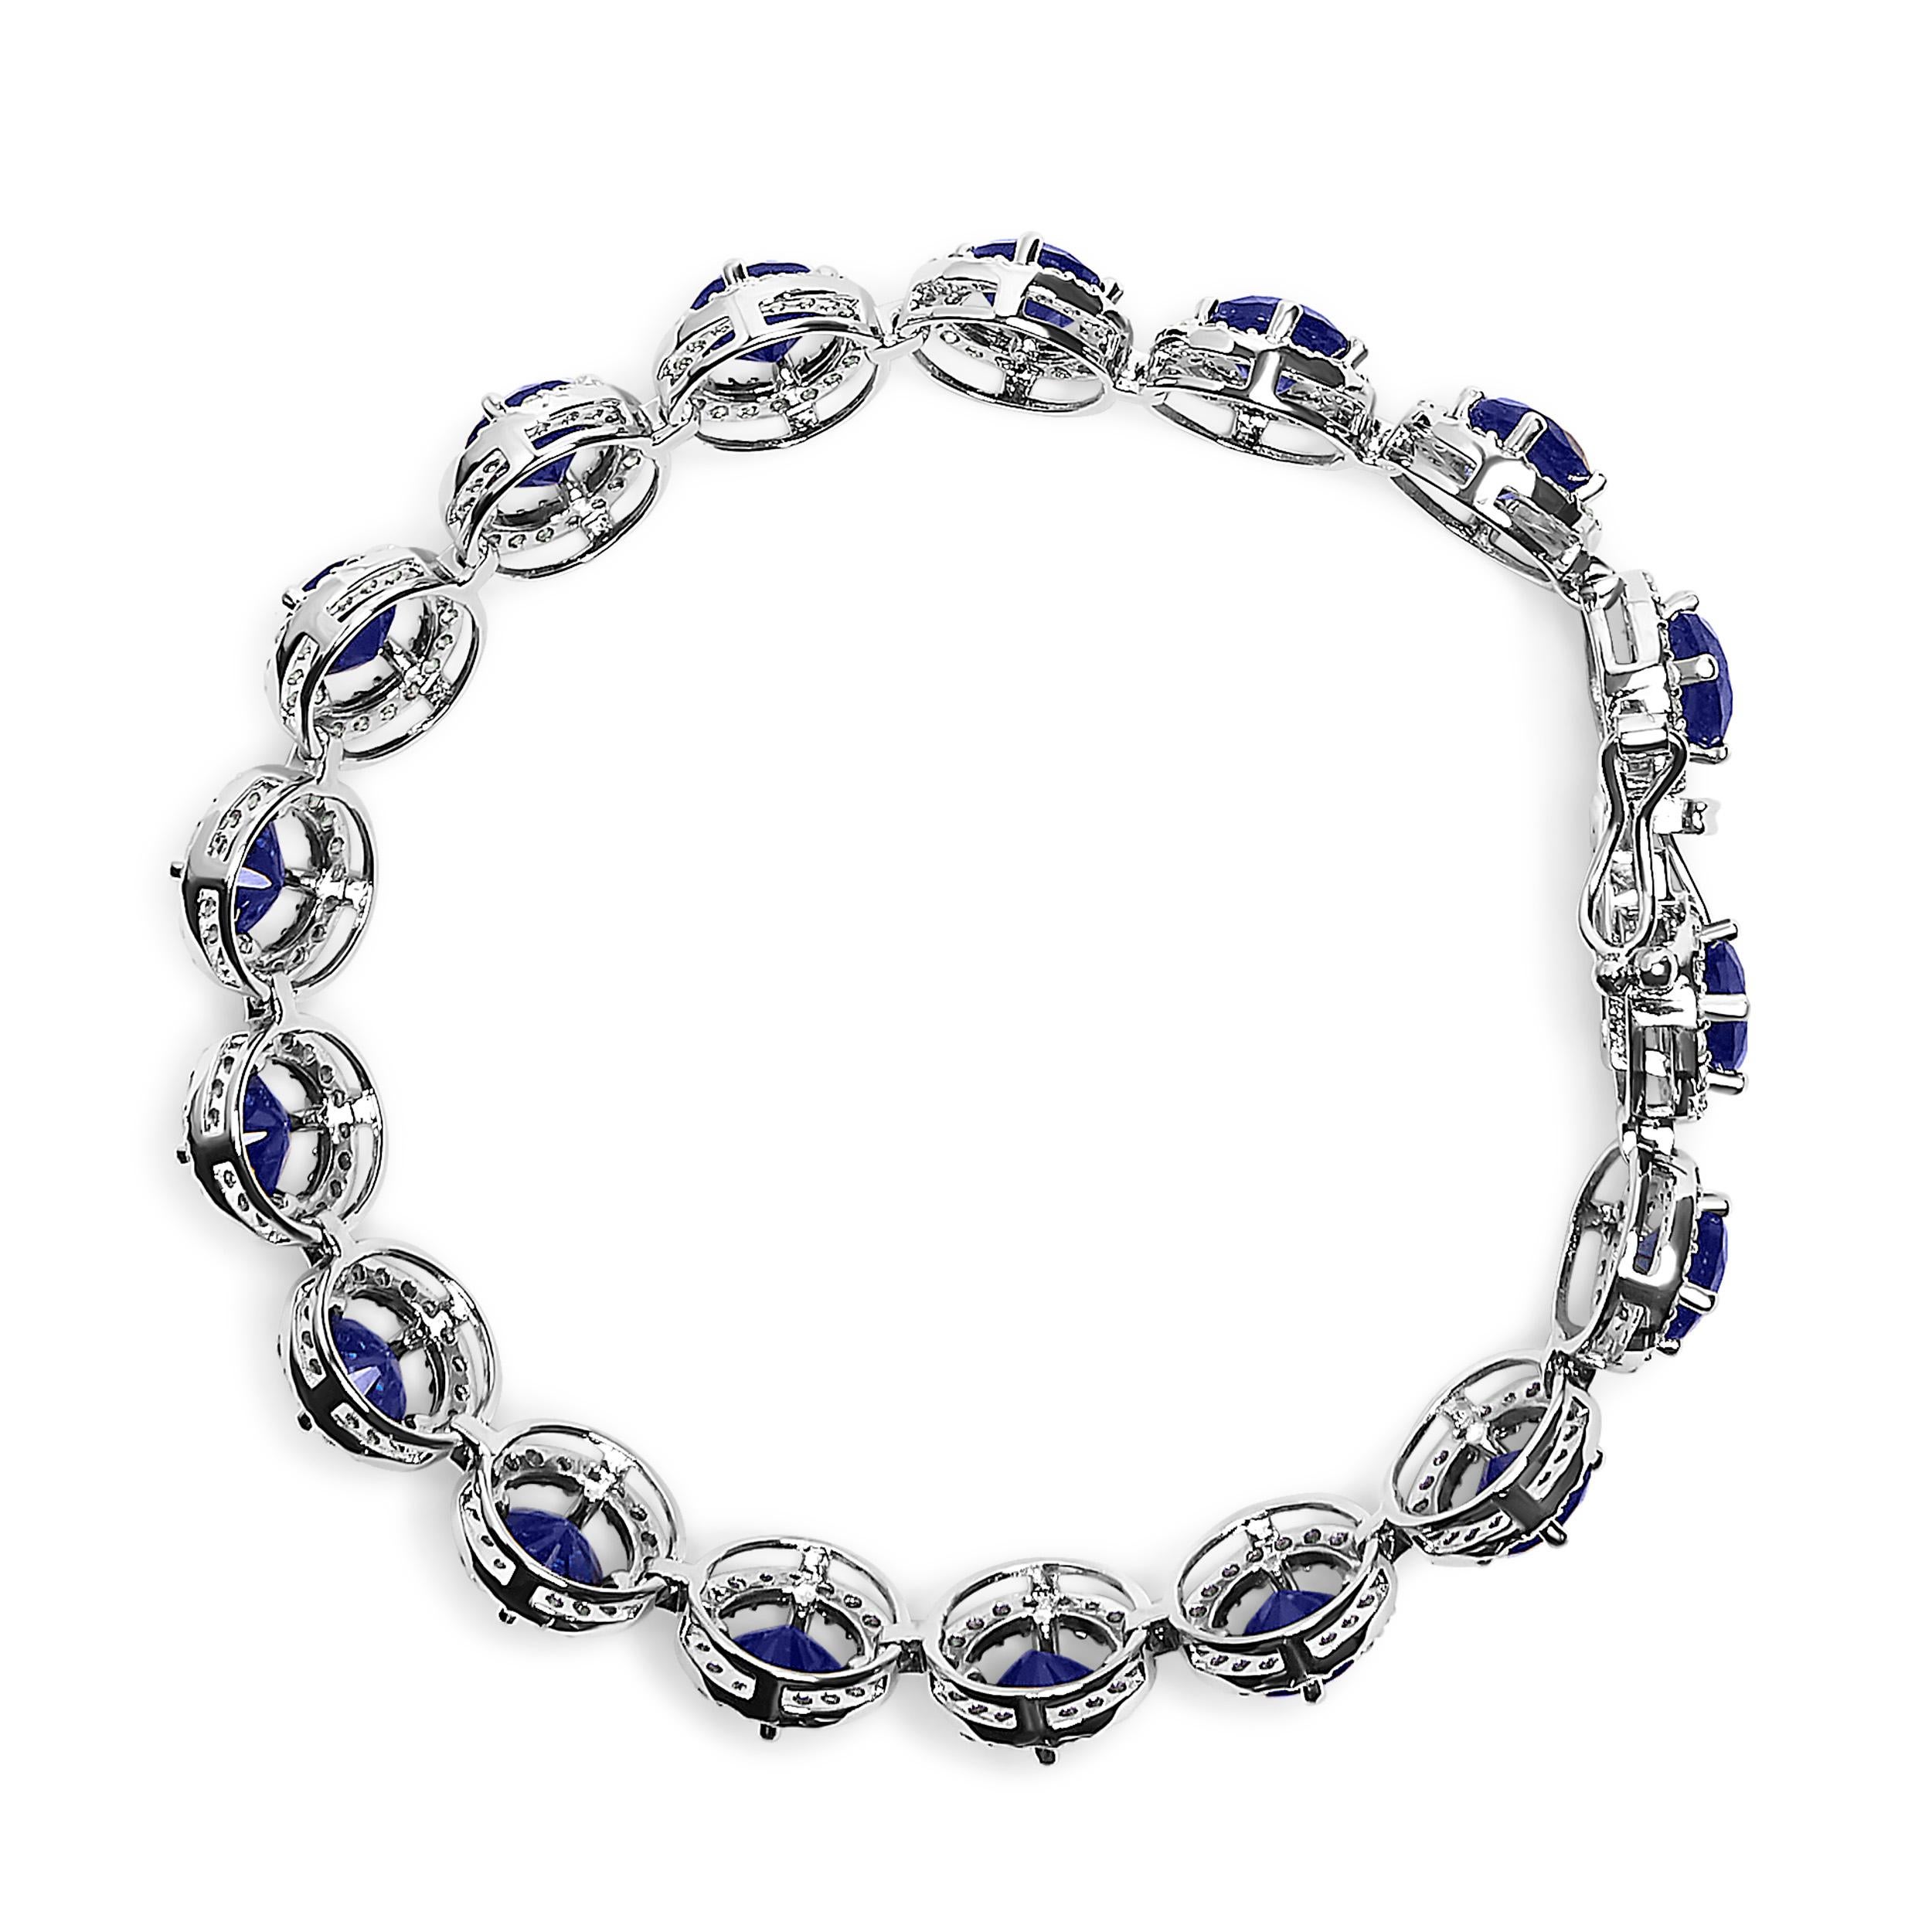 Contemporary Sterling Silver 21.0 Cttw Created Blue Sapphire & White Topaz Halo Link Bracelet For Sale